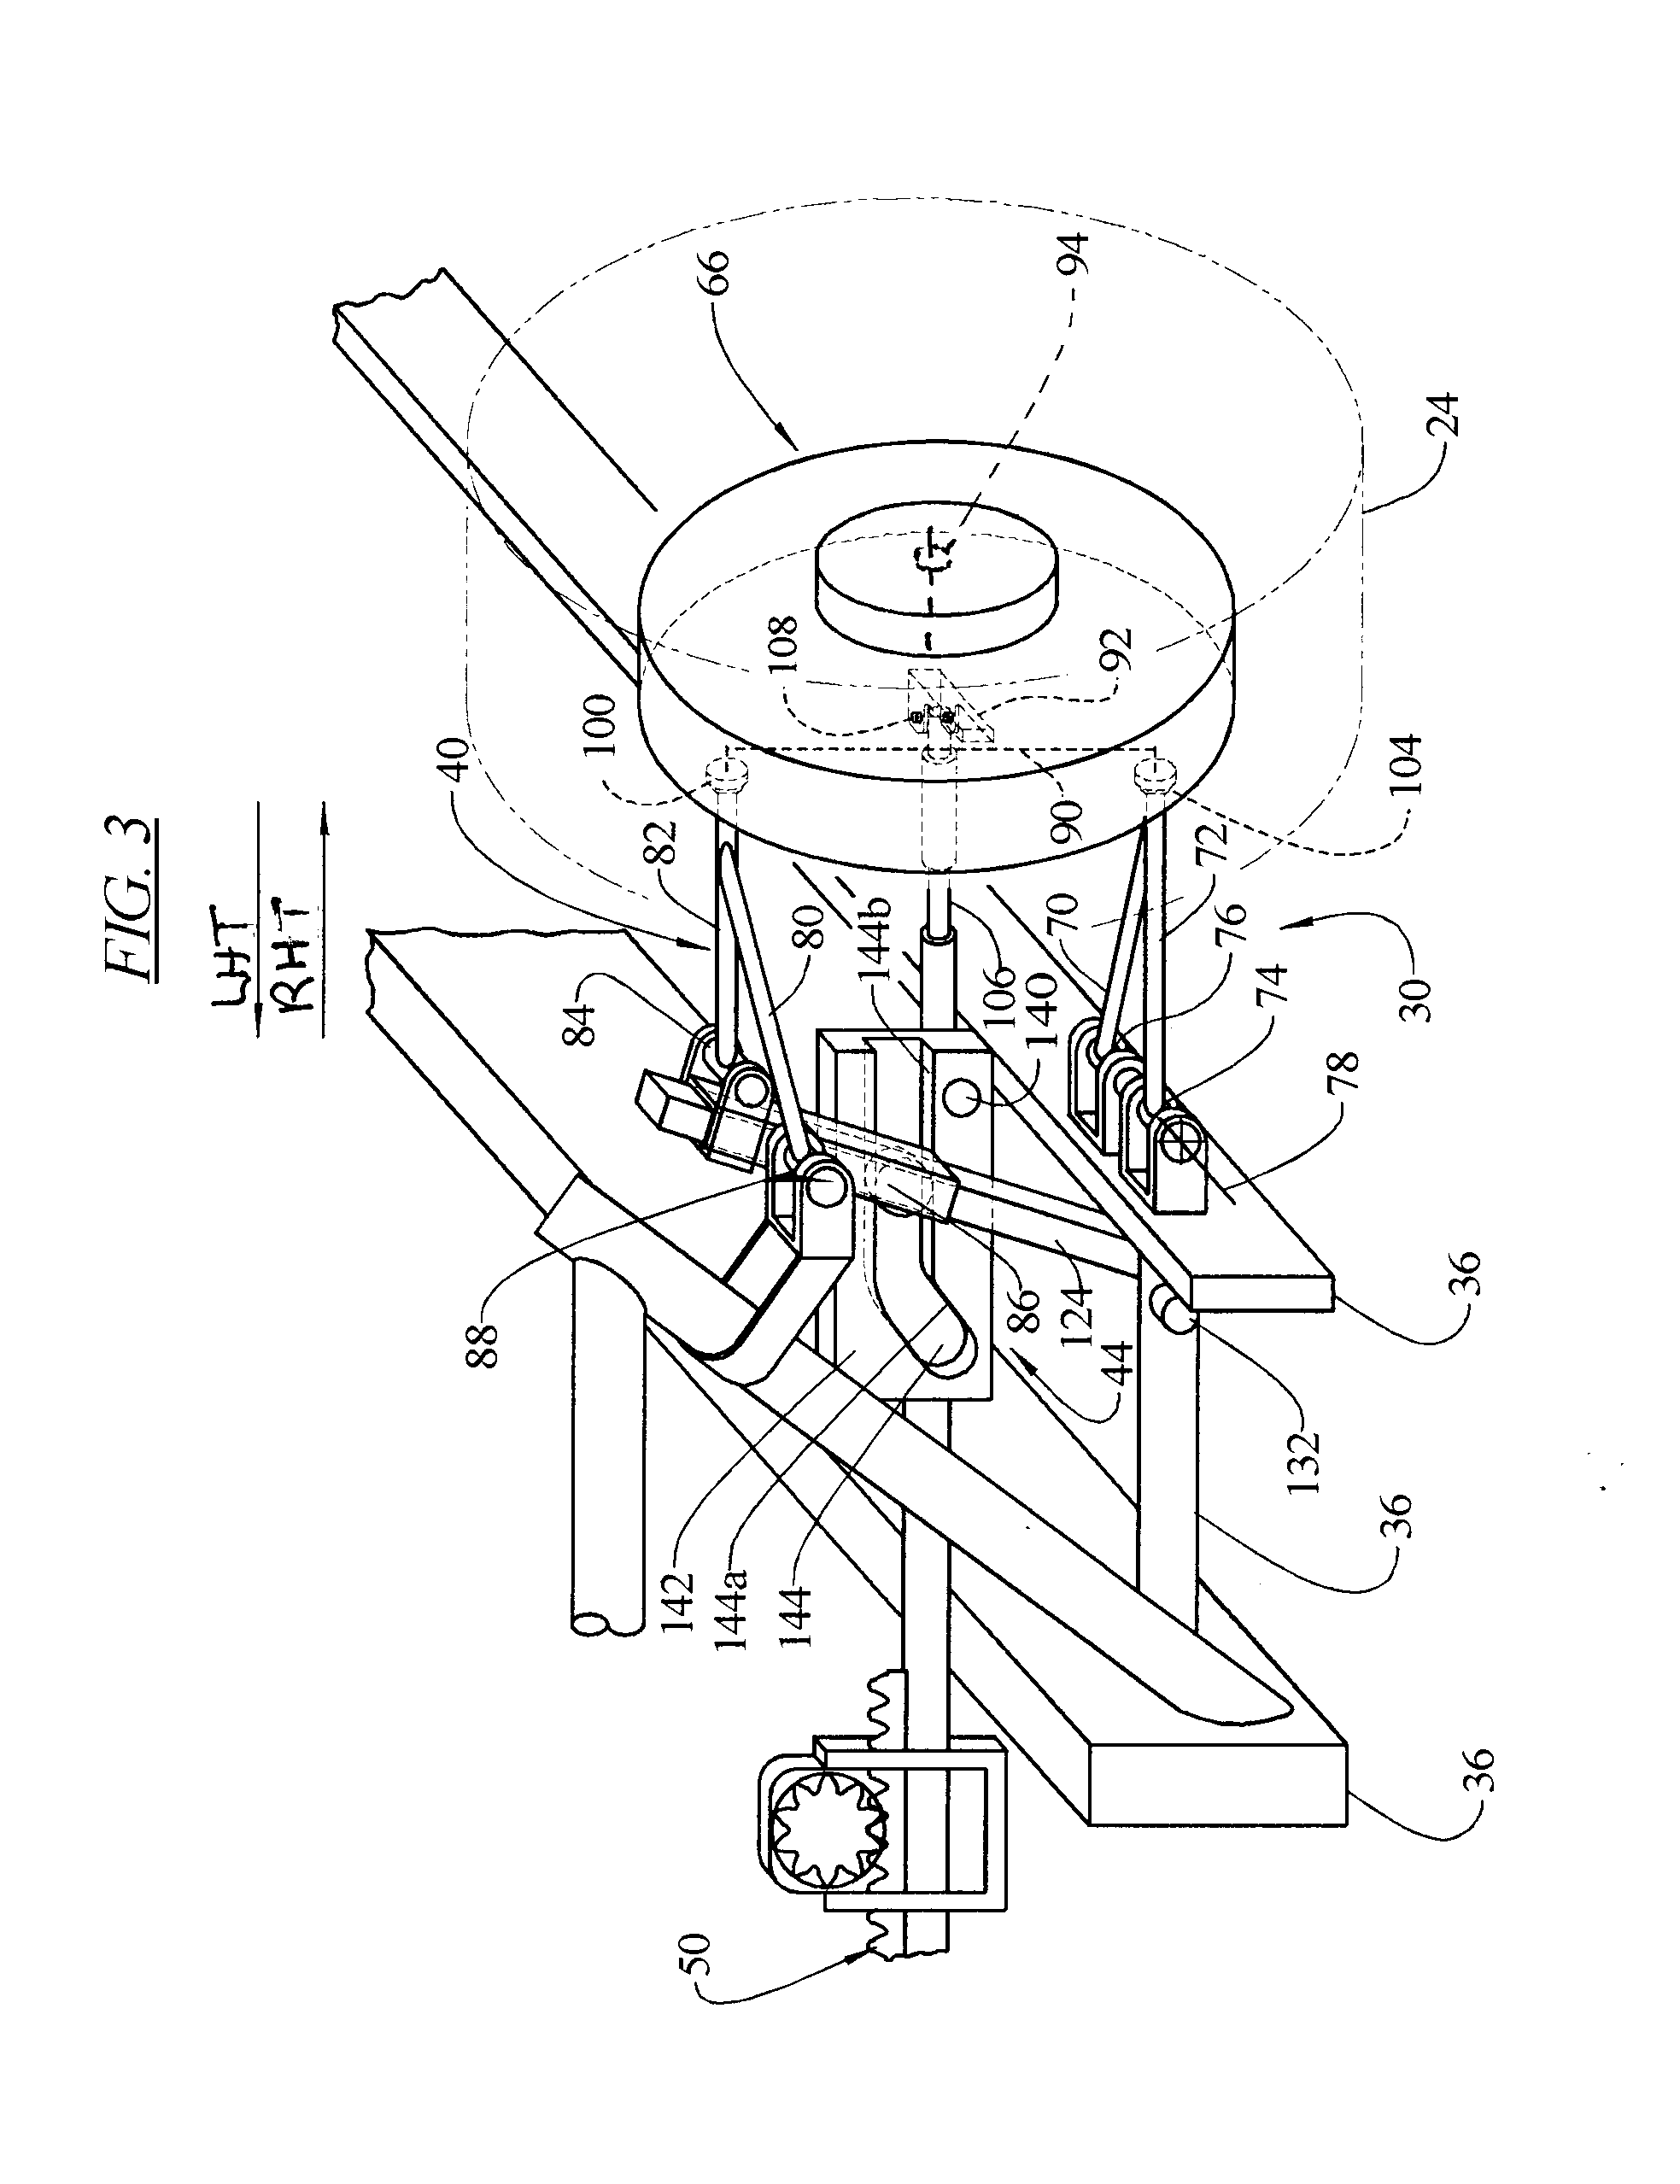 Vehicle Suspension System with a Variable Camber System